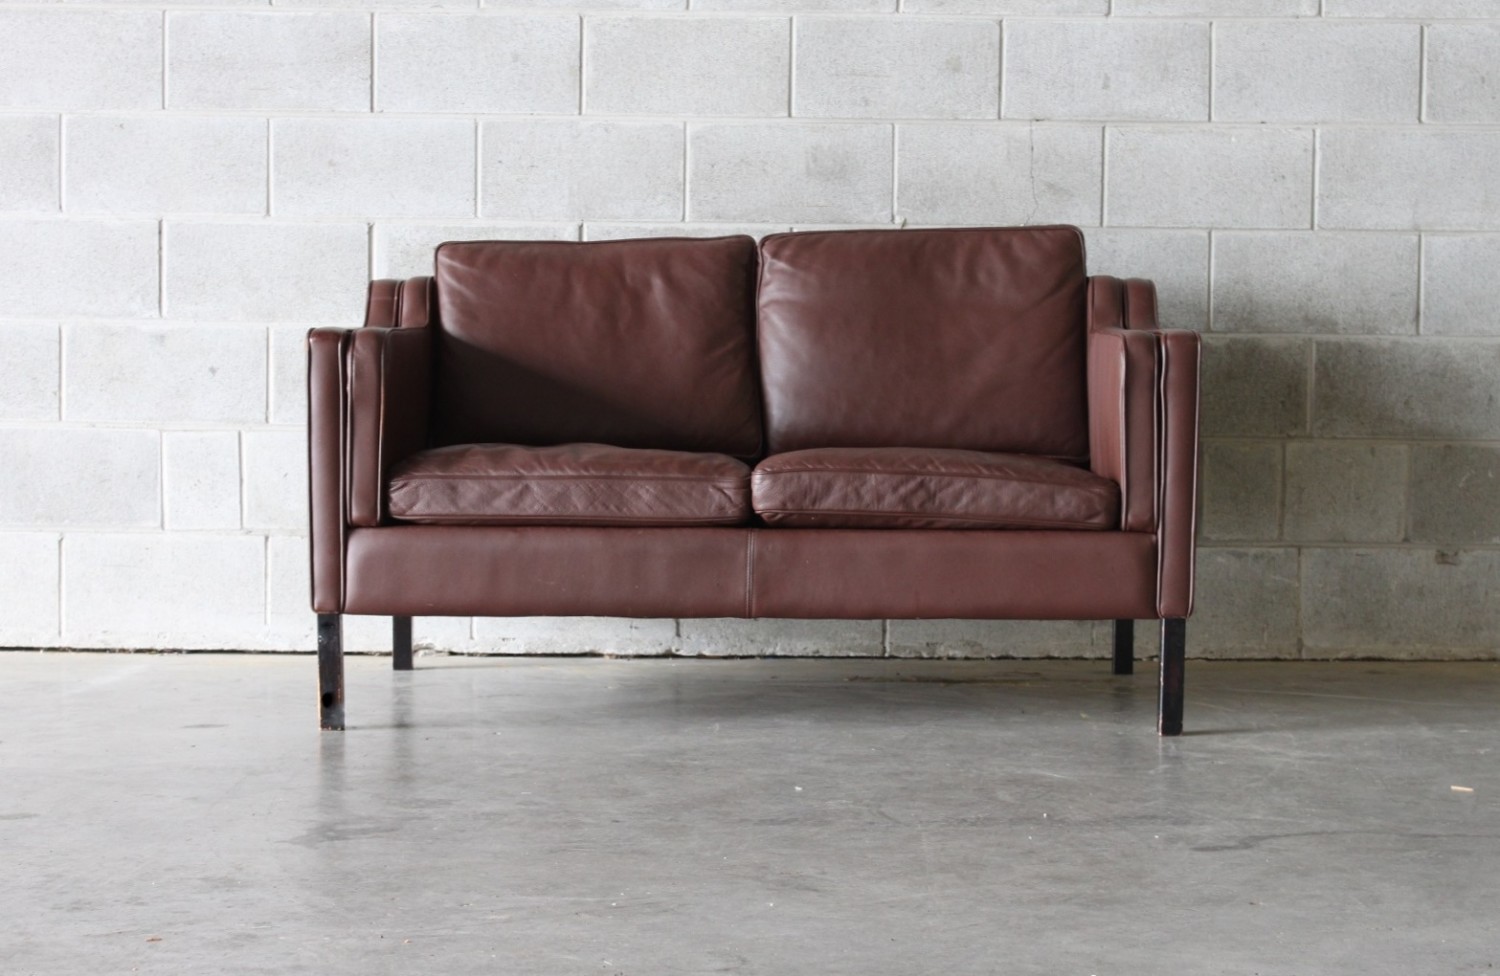 Pair of Brown Leather Sofas